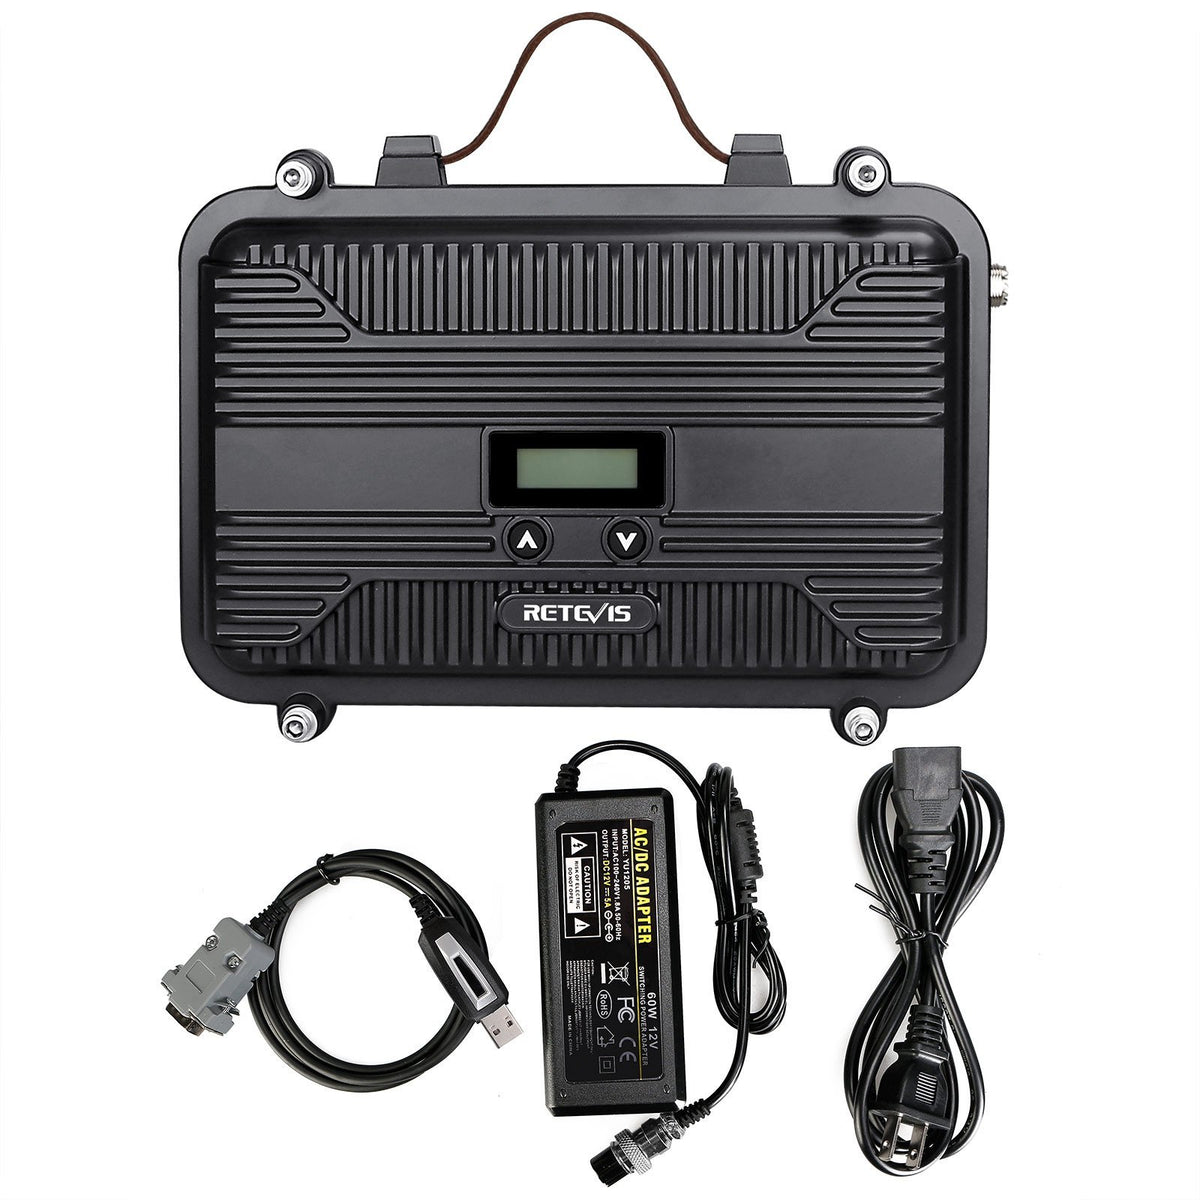 Retevis RT97S Portable GMRS Repeater –